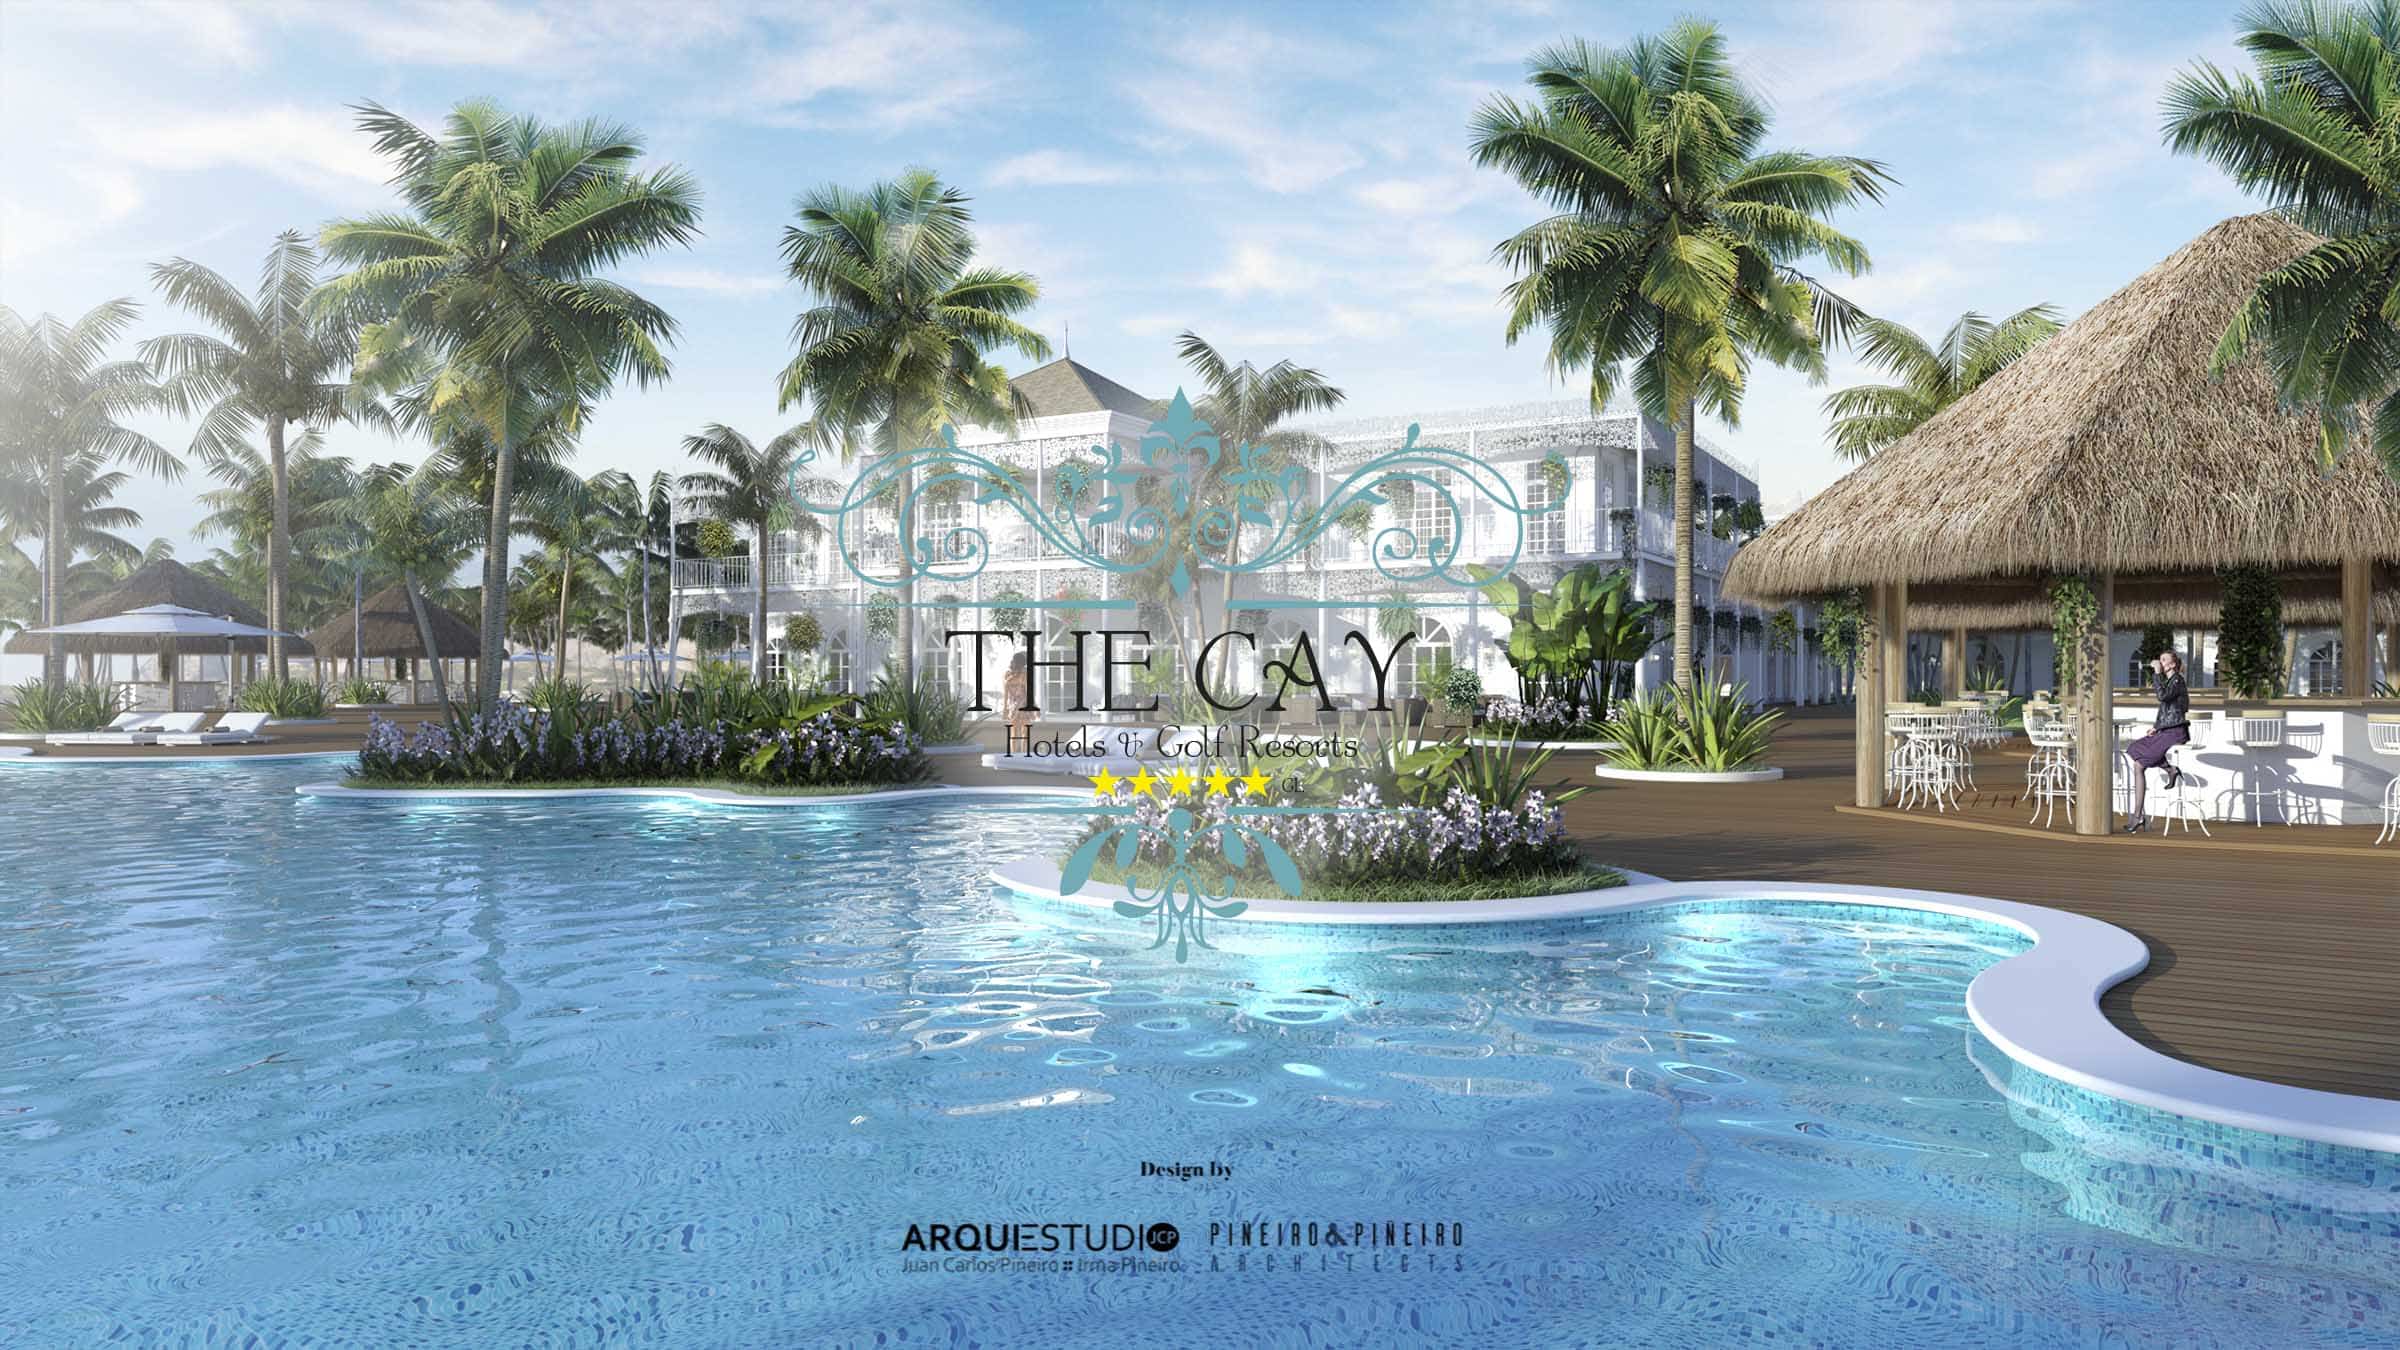 The Cay Hotels & Golf Resort